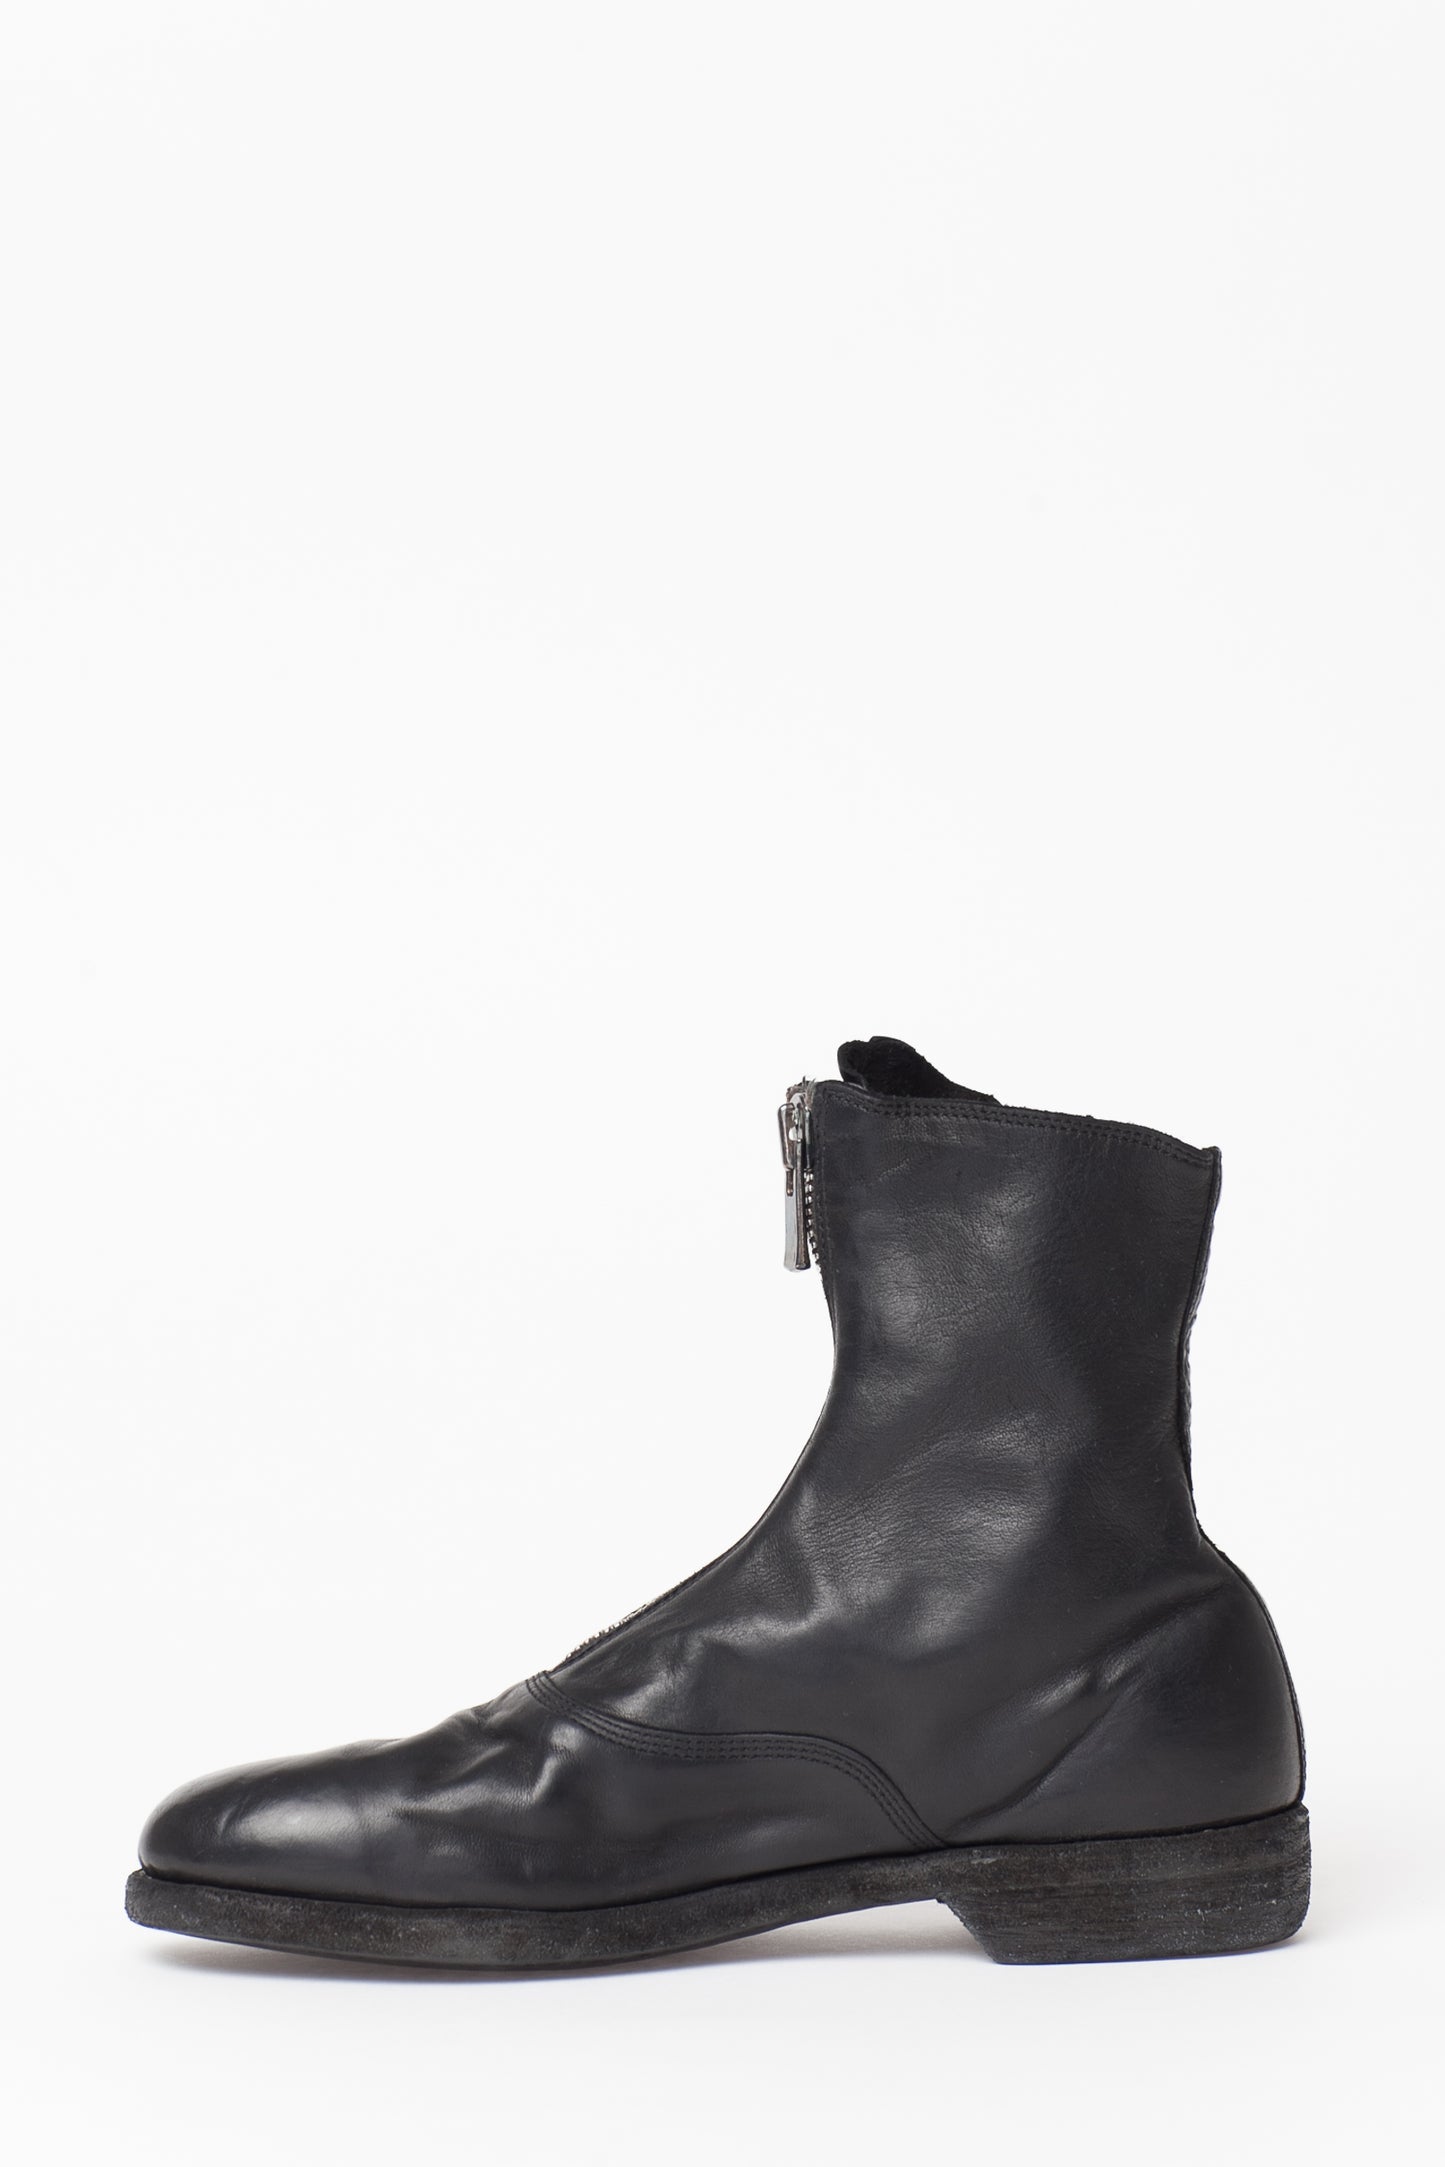 Guidi Black Front Zip 210 Boots